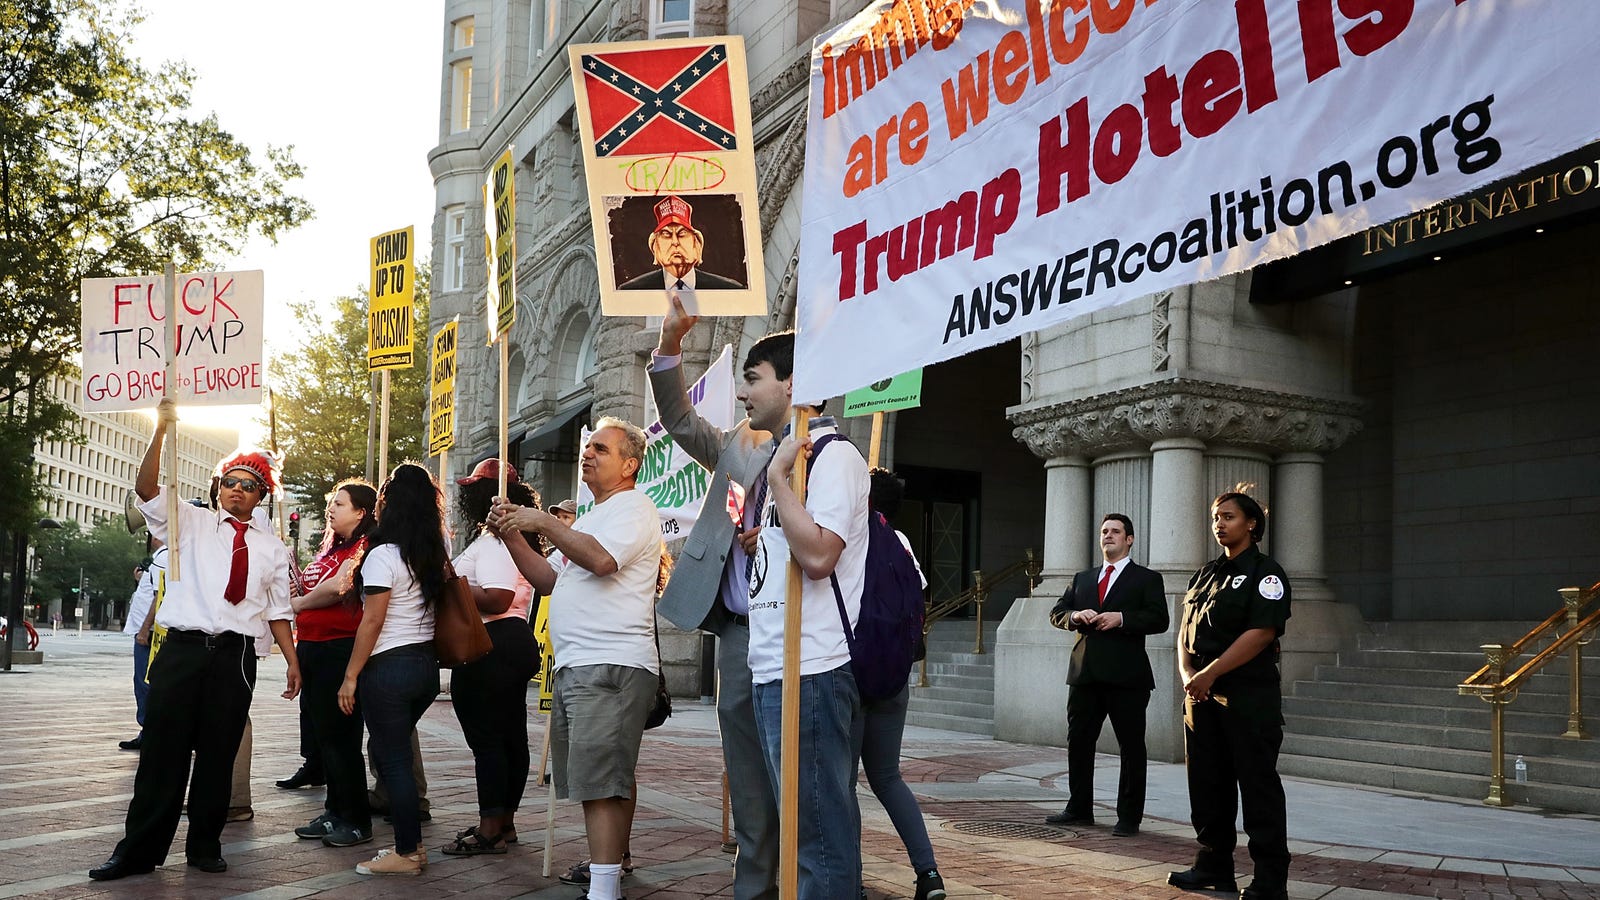 Trump-Loving D.C. Police Group Books Party at Trump Hotel and Black Cops Are Mad AF